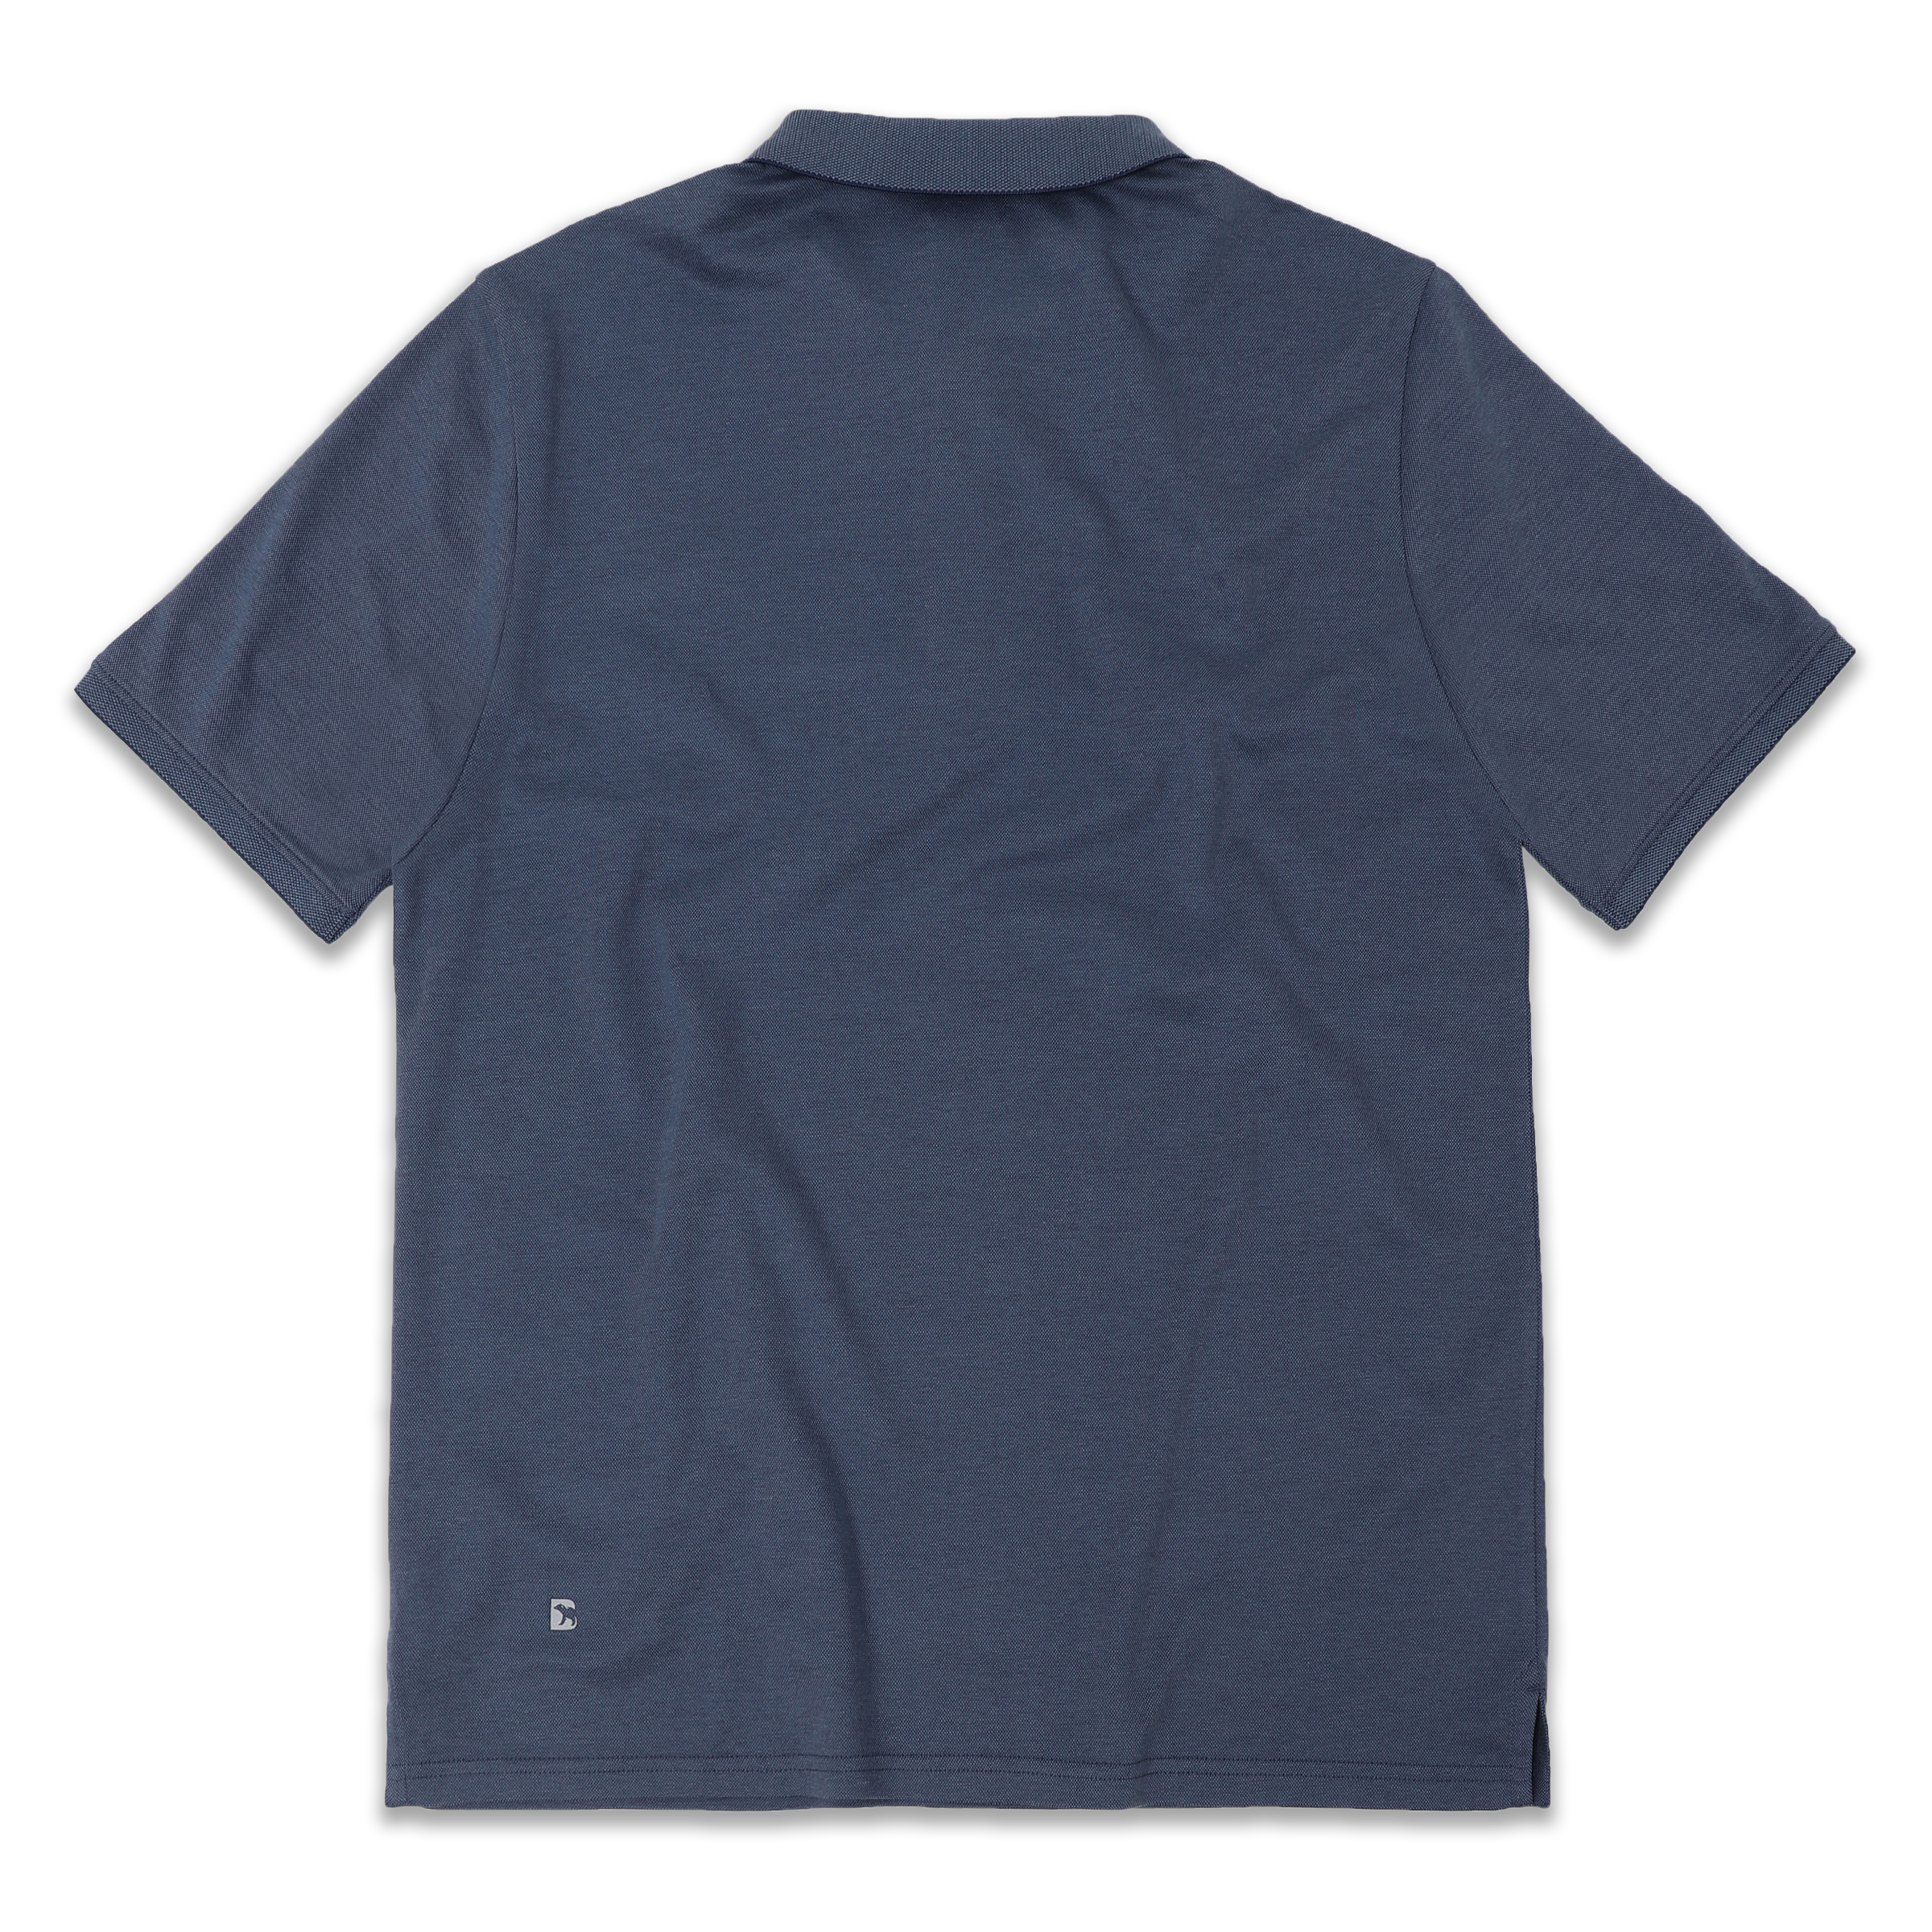 Range Polo Navy back with ribbed collar, ribbed short sleeves, and Bearbottom B logo in bottom left corner